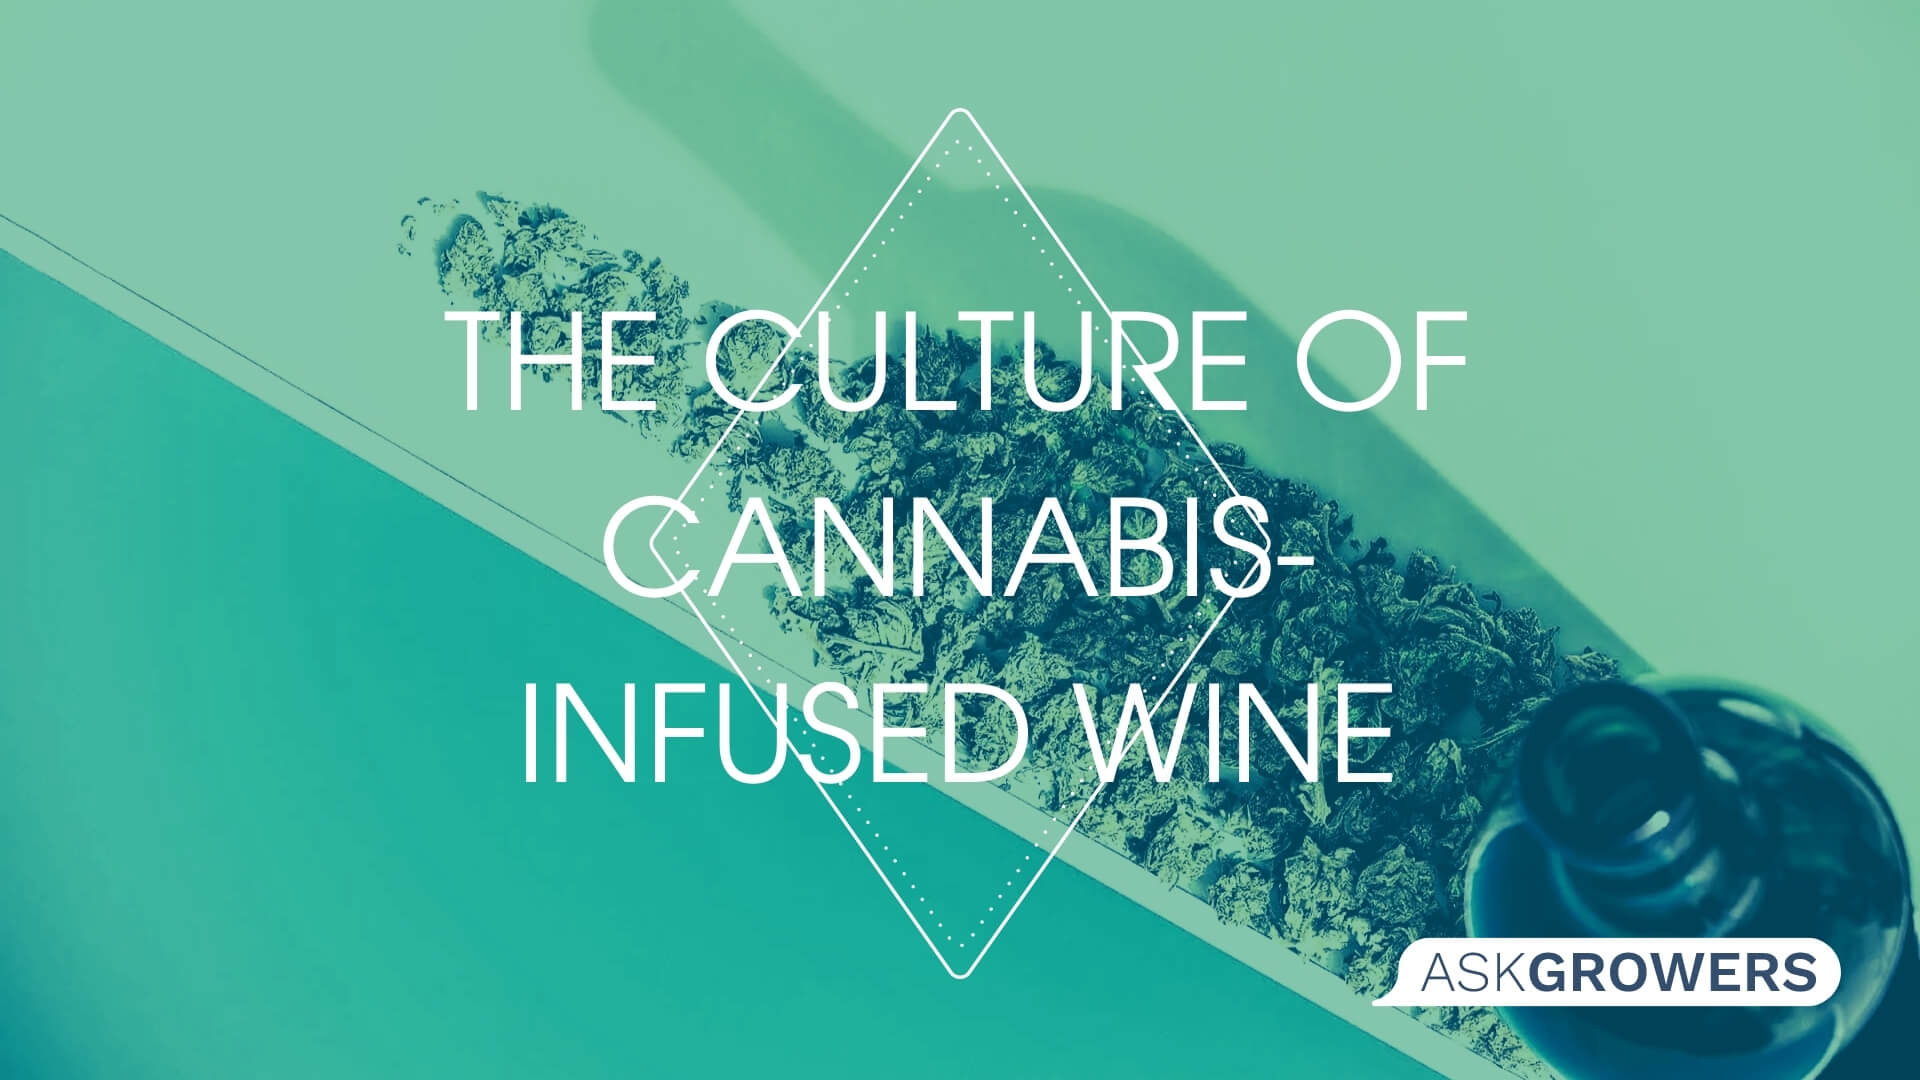 The Culture Of Cannabis-Infused Wine: New Trend